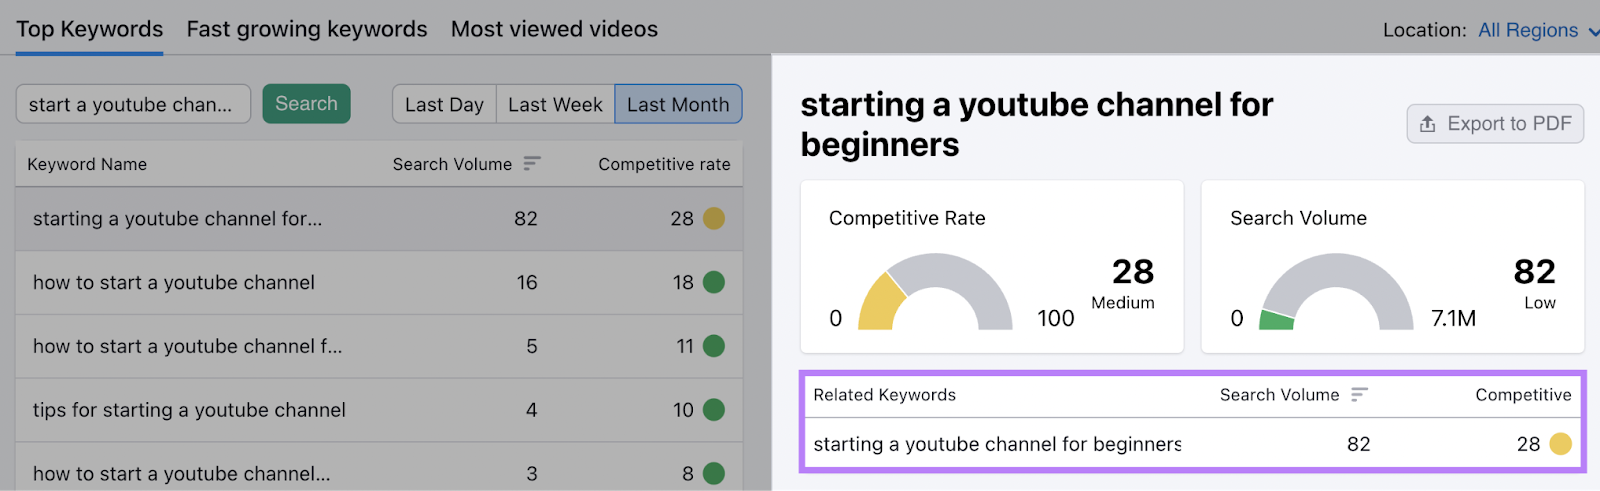 "start a youtube channel for beginners” related keywords